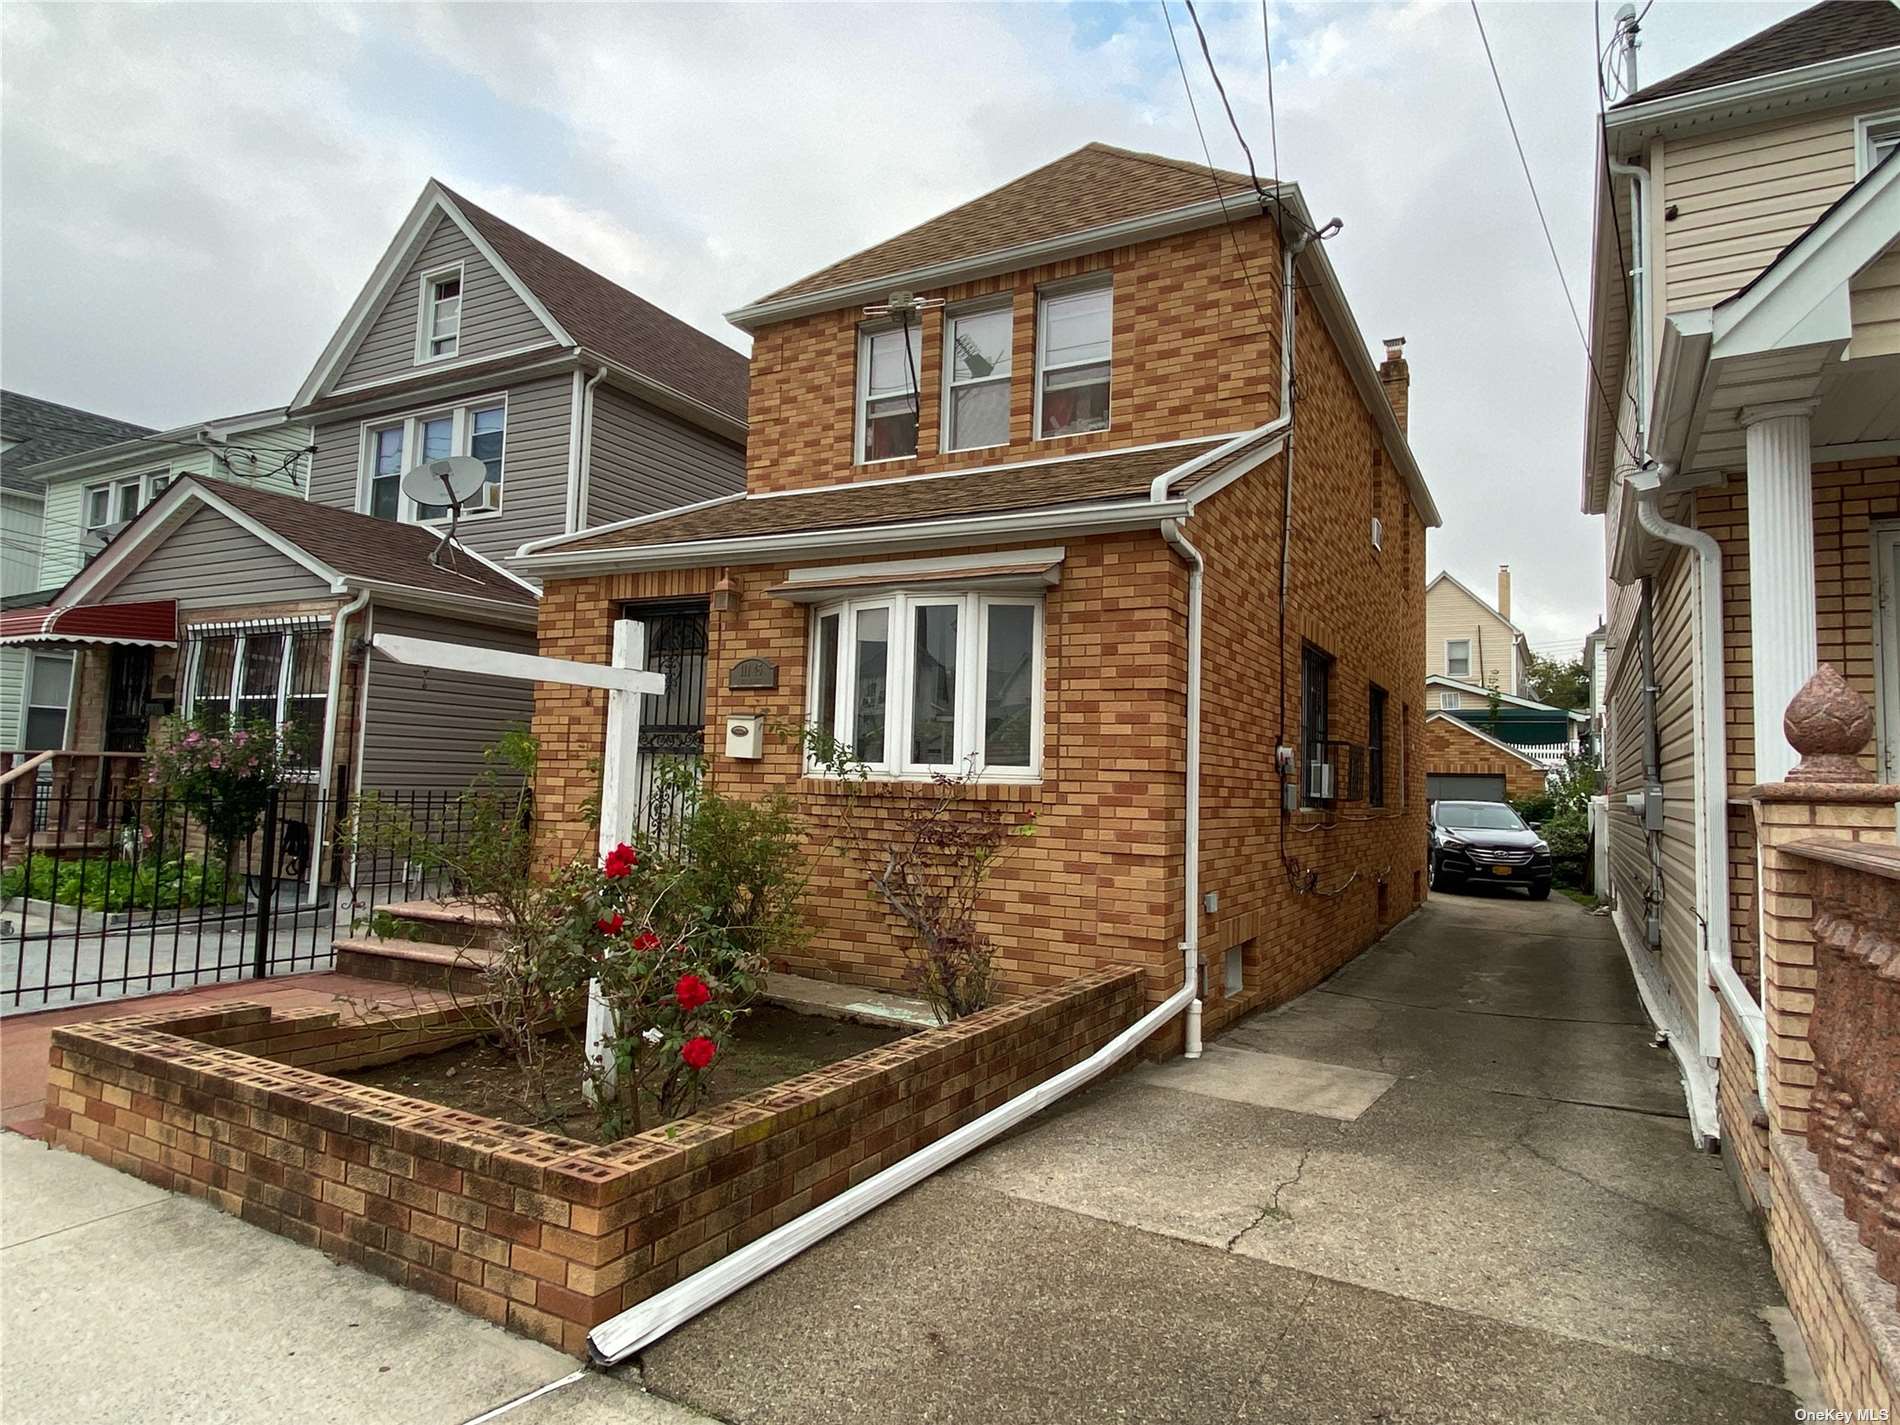 Single Family in South Ozone Park - 120th  Queens, NY 11420